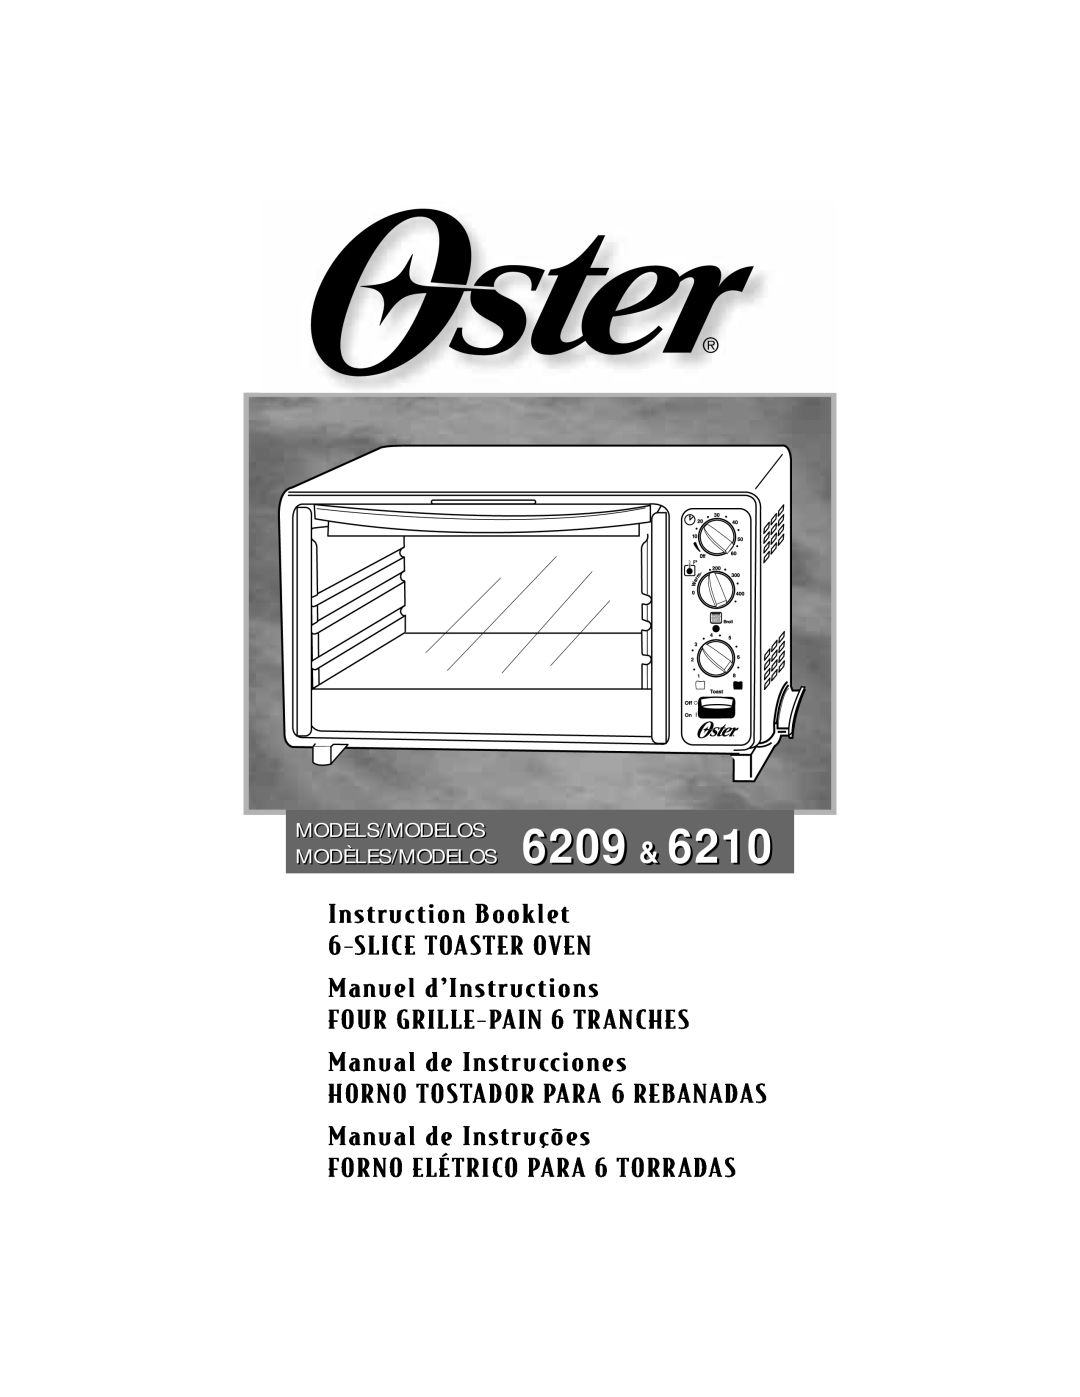 Oster 6210 manual 6209, Instruction Booklet 6 -SLICETOASTER OVEN, Manuel dÕInstructions, FOUR GRILLE- PAIN 6 TRANCHES 